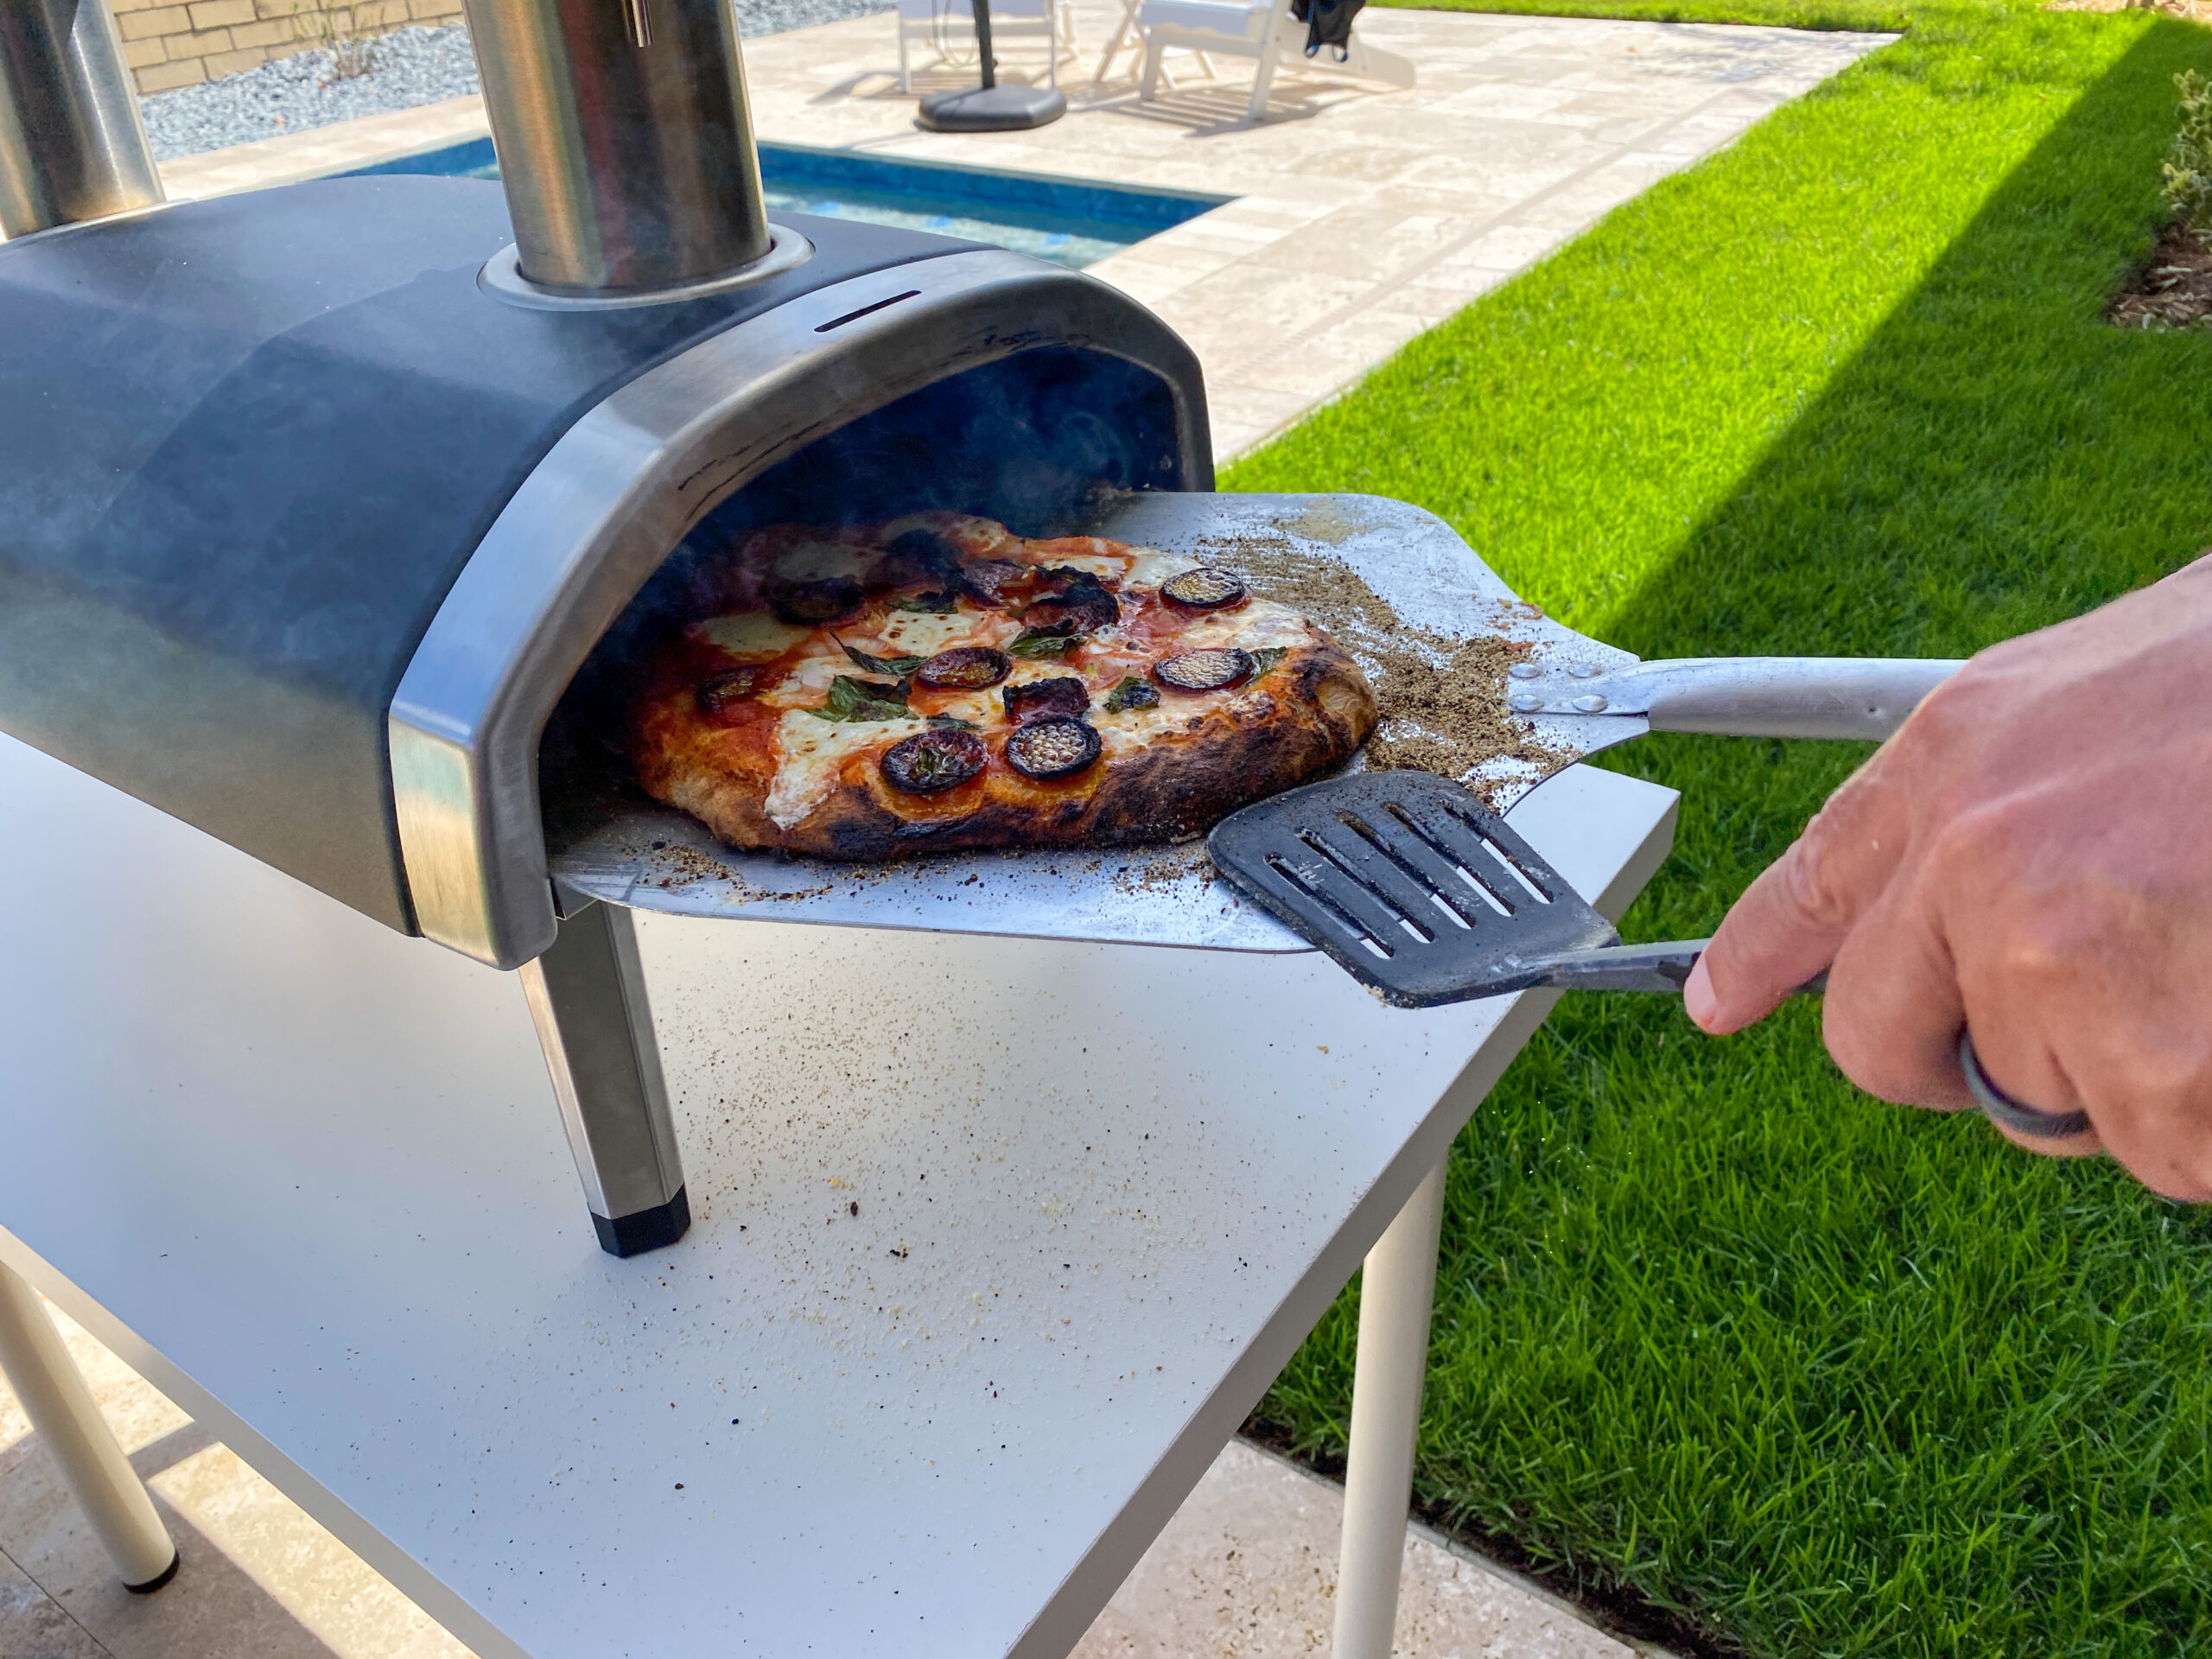 How to Use Ooni Pizza Oven: A Clear and Confident Guide